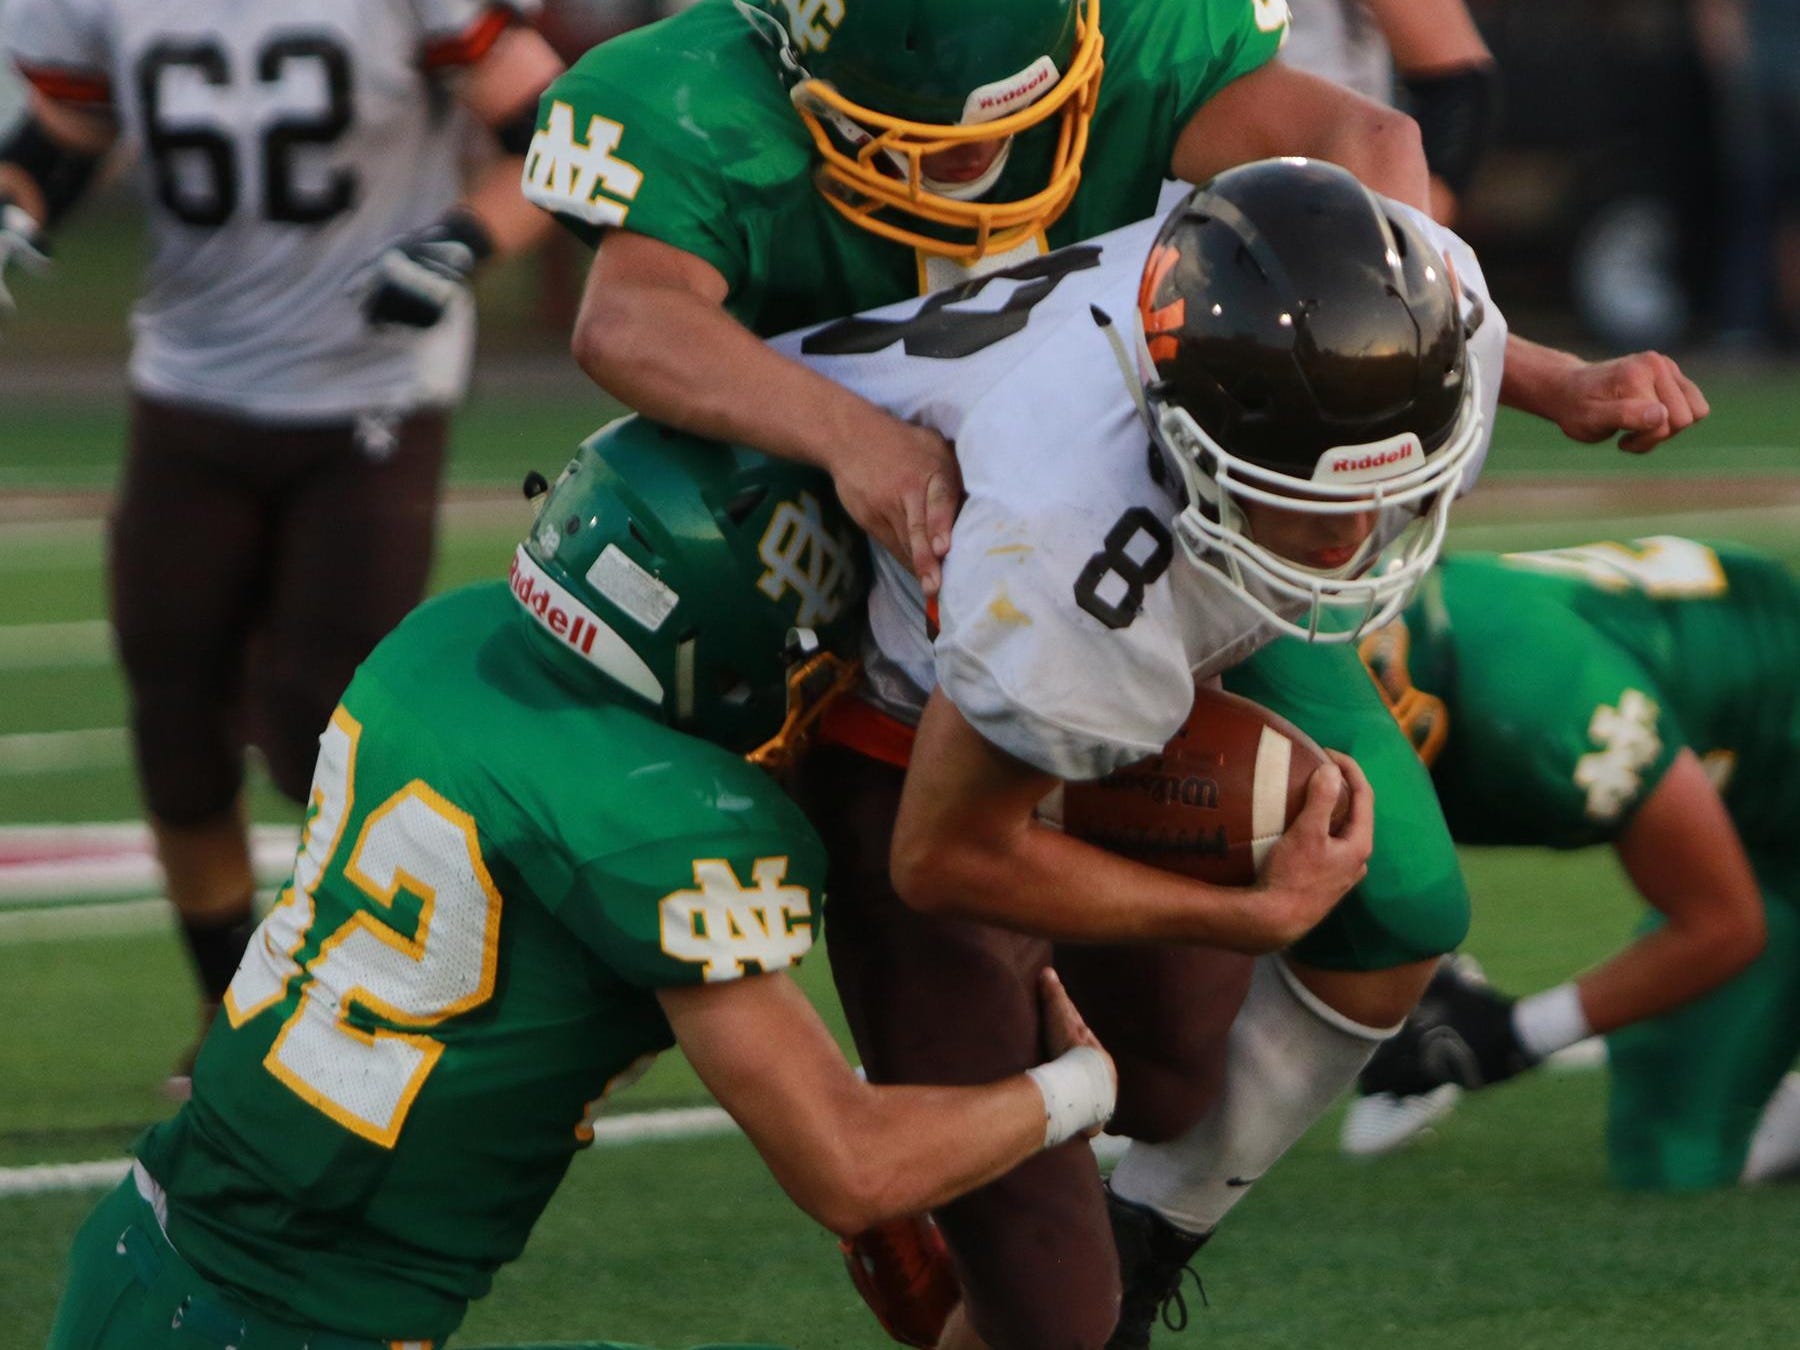 Jud Lewis and Sam Bending tackleHunter Edwards of Nelsonville-York in their first home game of the season.